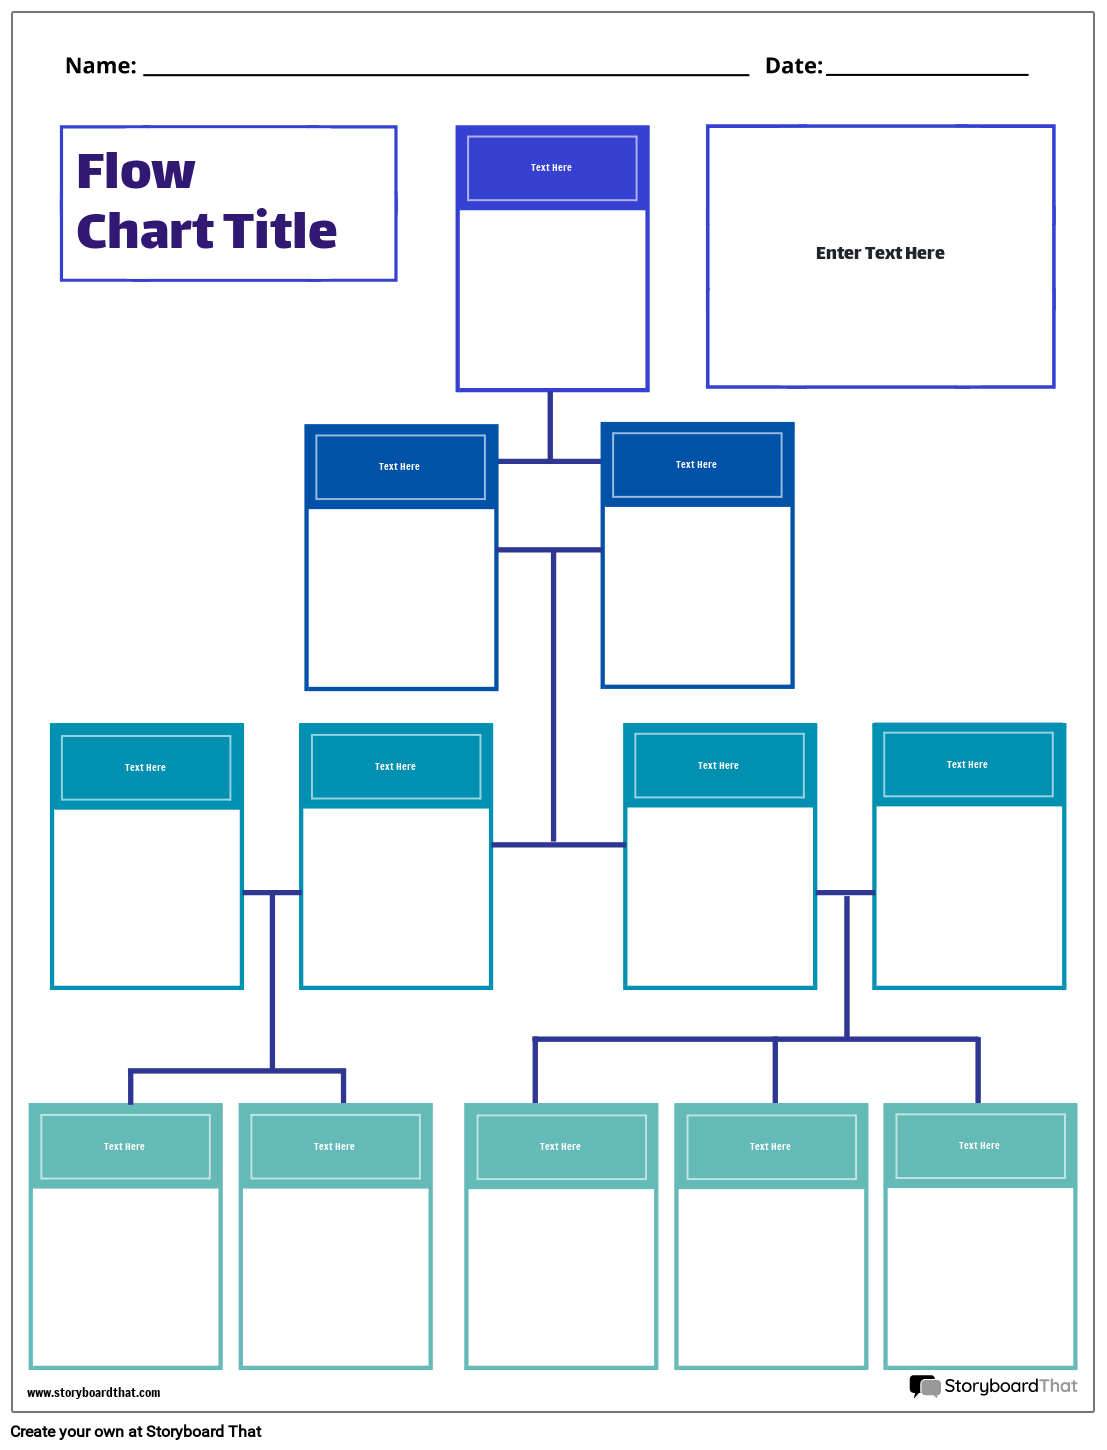 new-create-page-flow-chart-template-4-storyboard